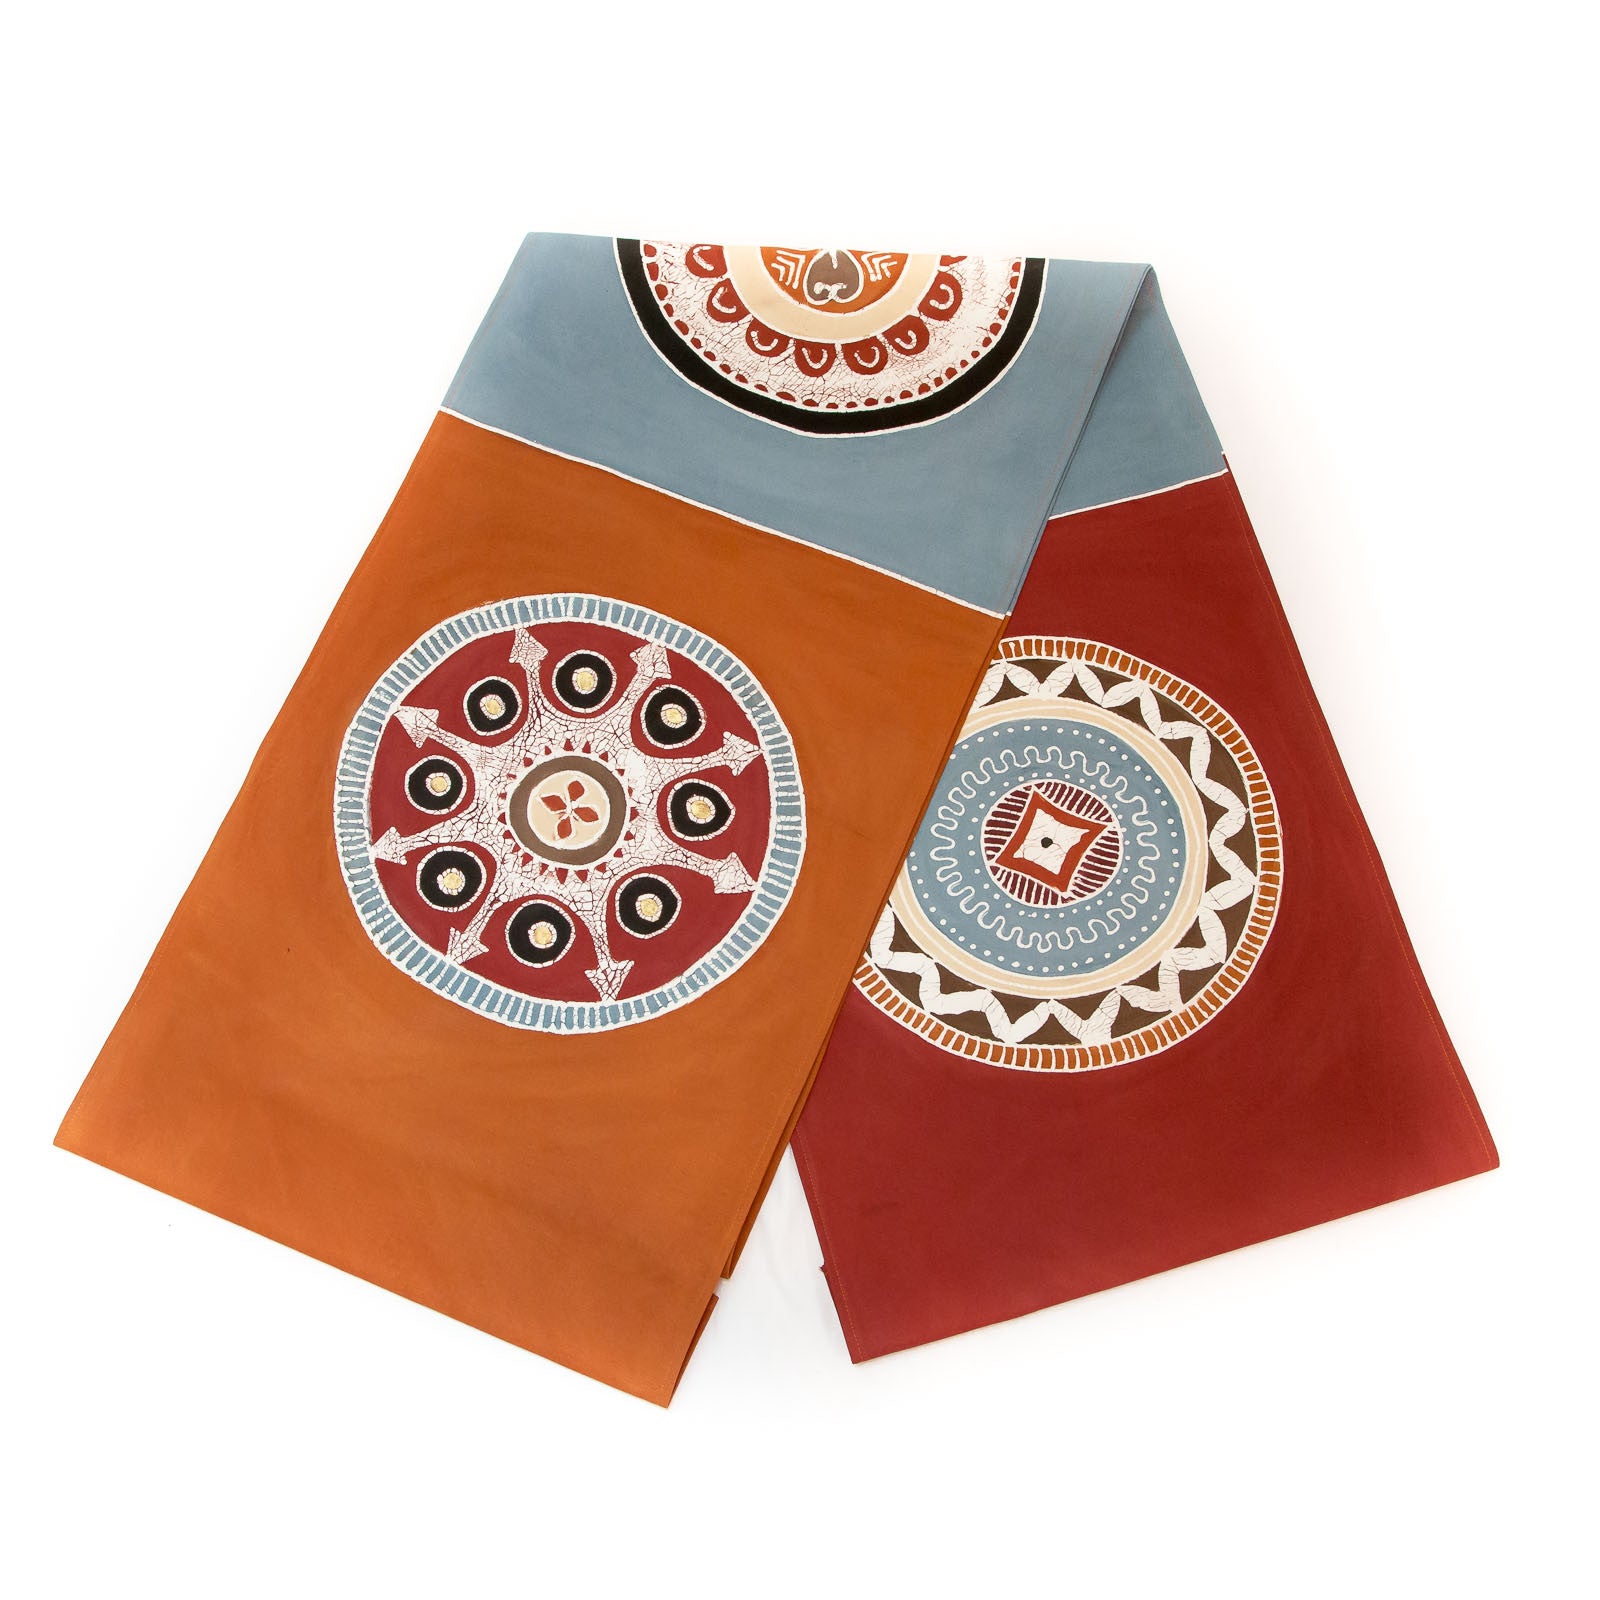 African Circles Massai Table Runner - Hand Painted by TRIBAL TEXTILES - Handcrafted Home Decor Interiors - African Made